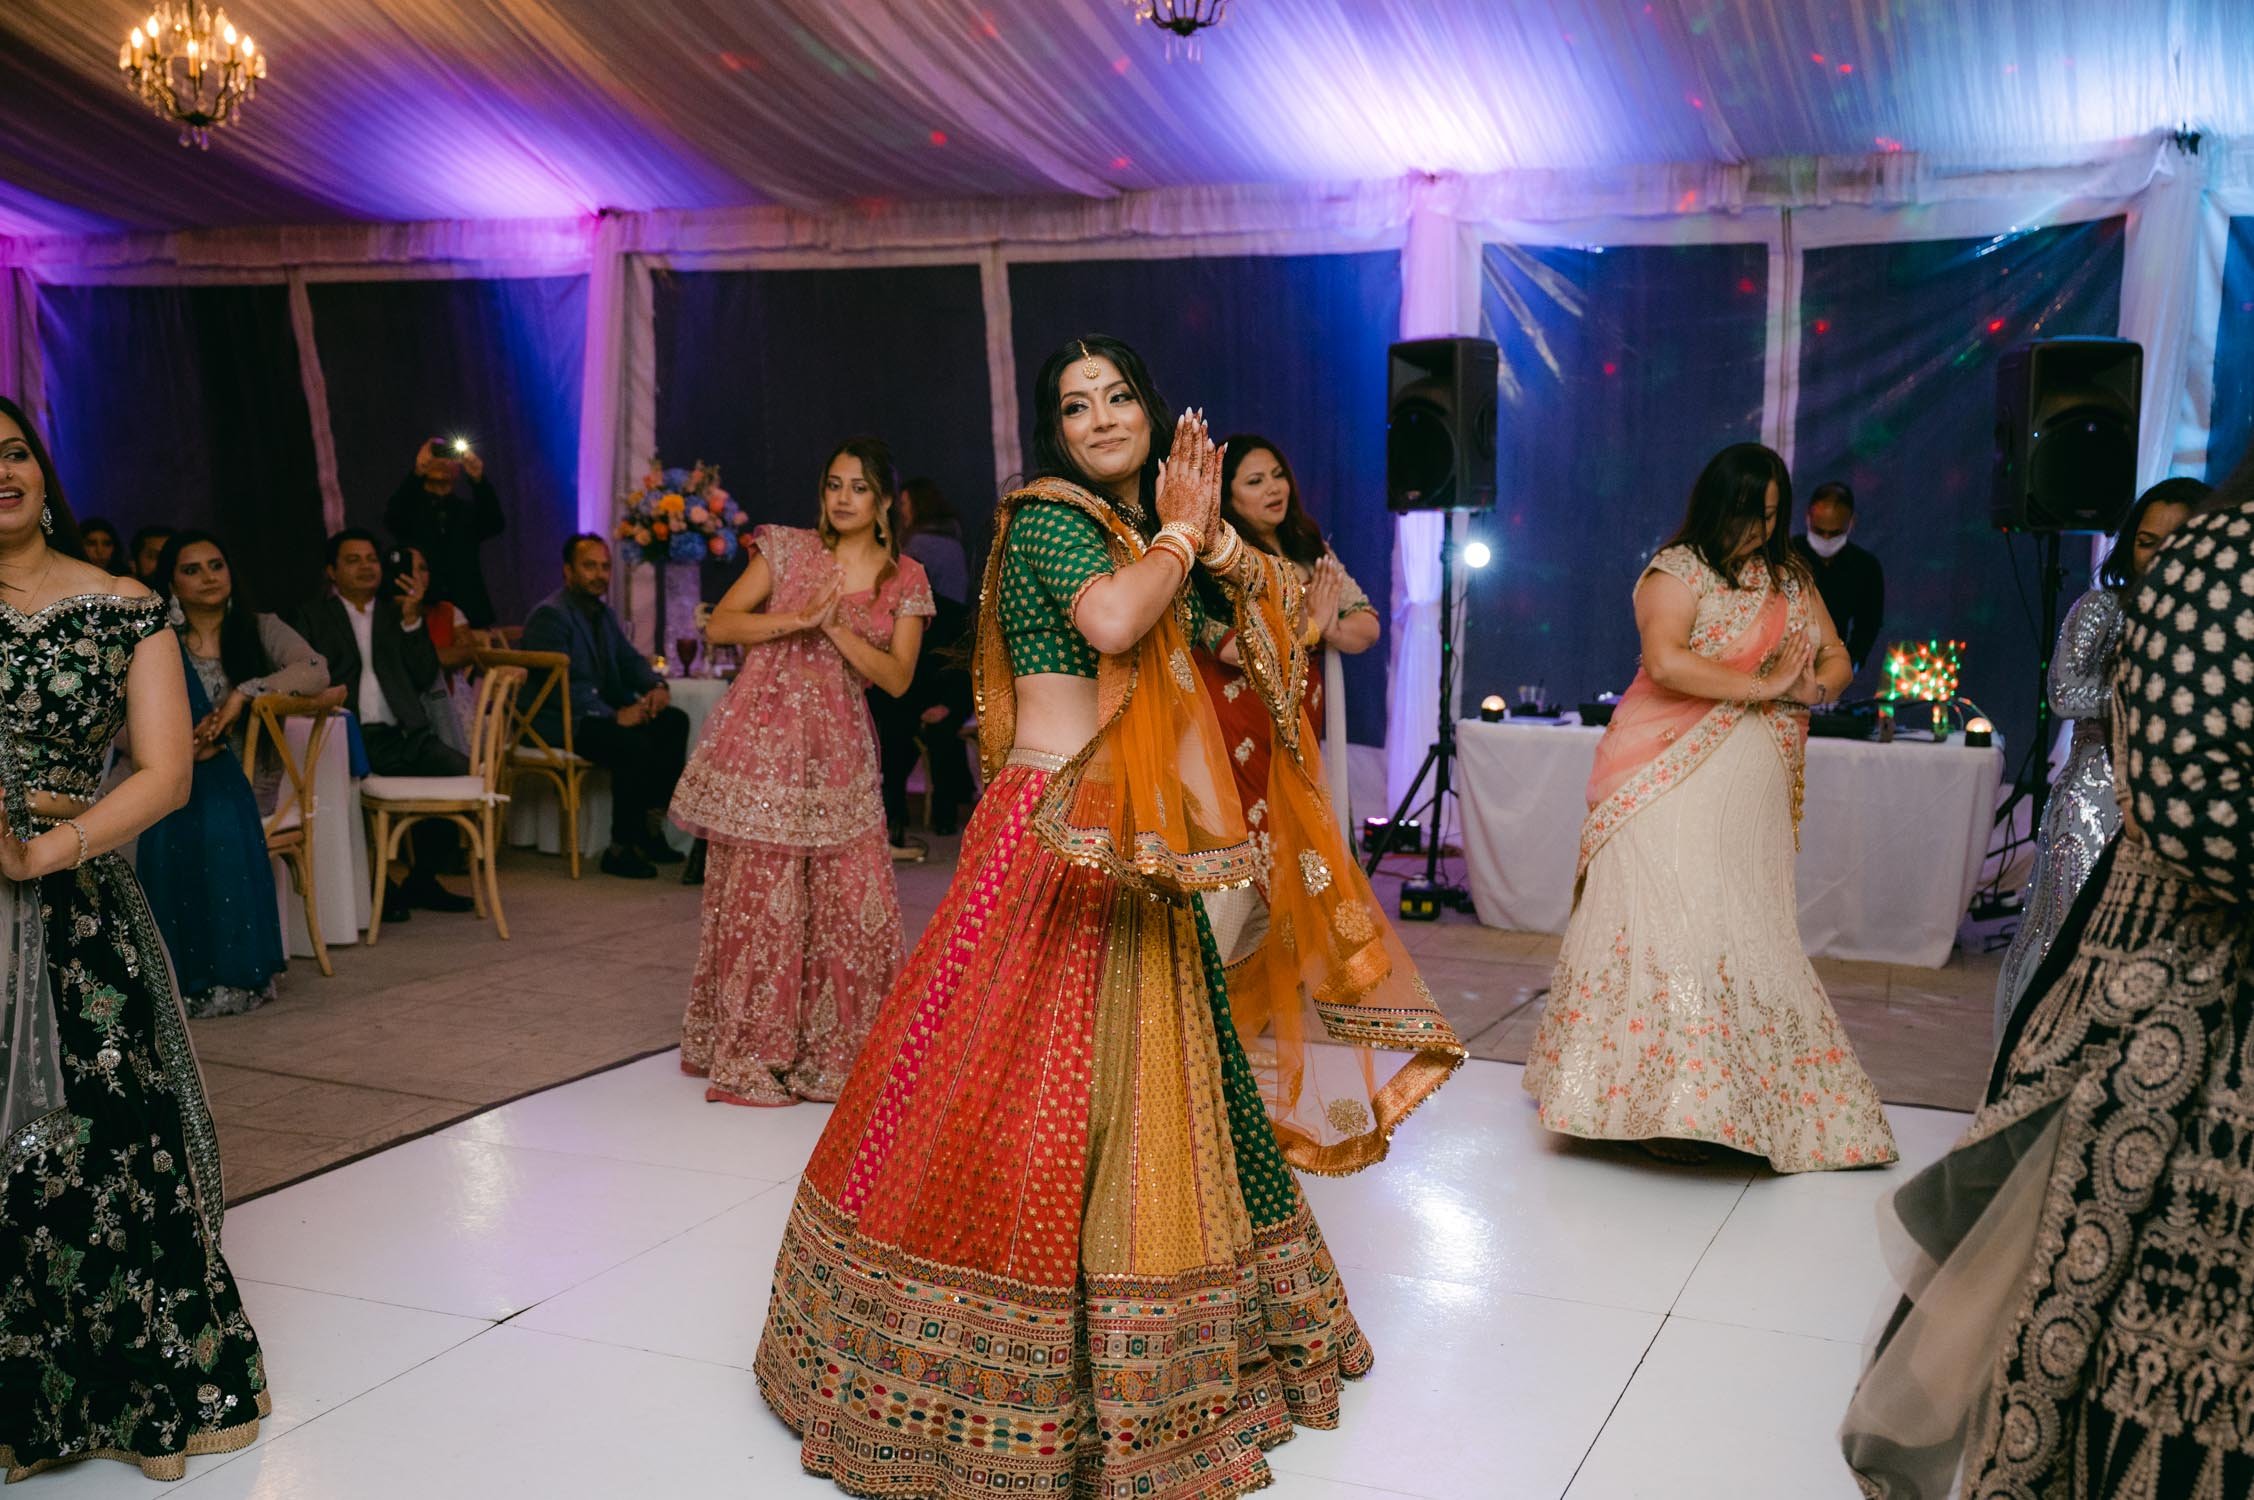 Indian wedding reception, photo of bride dancing for the groom